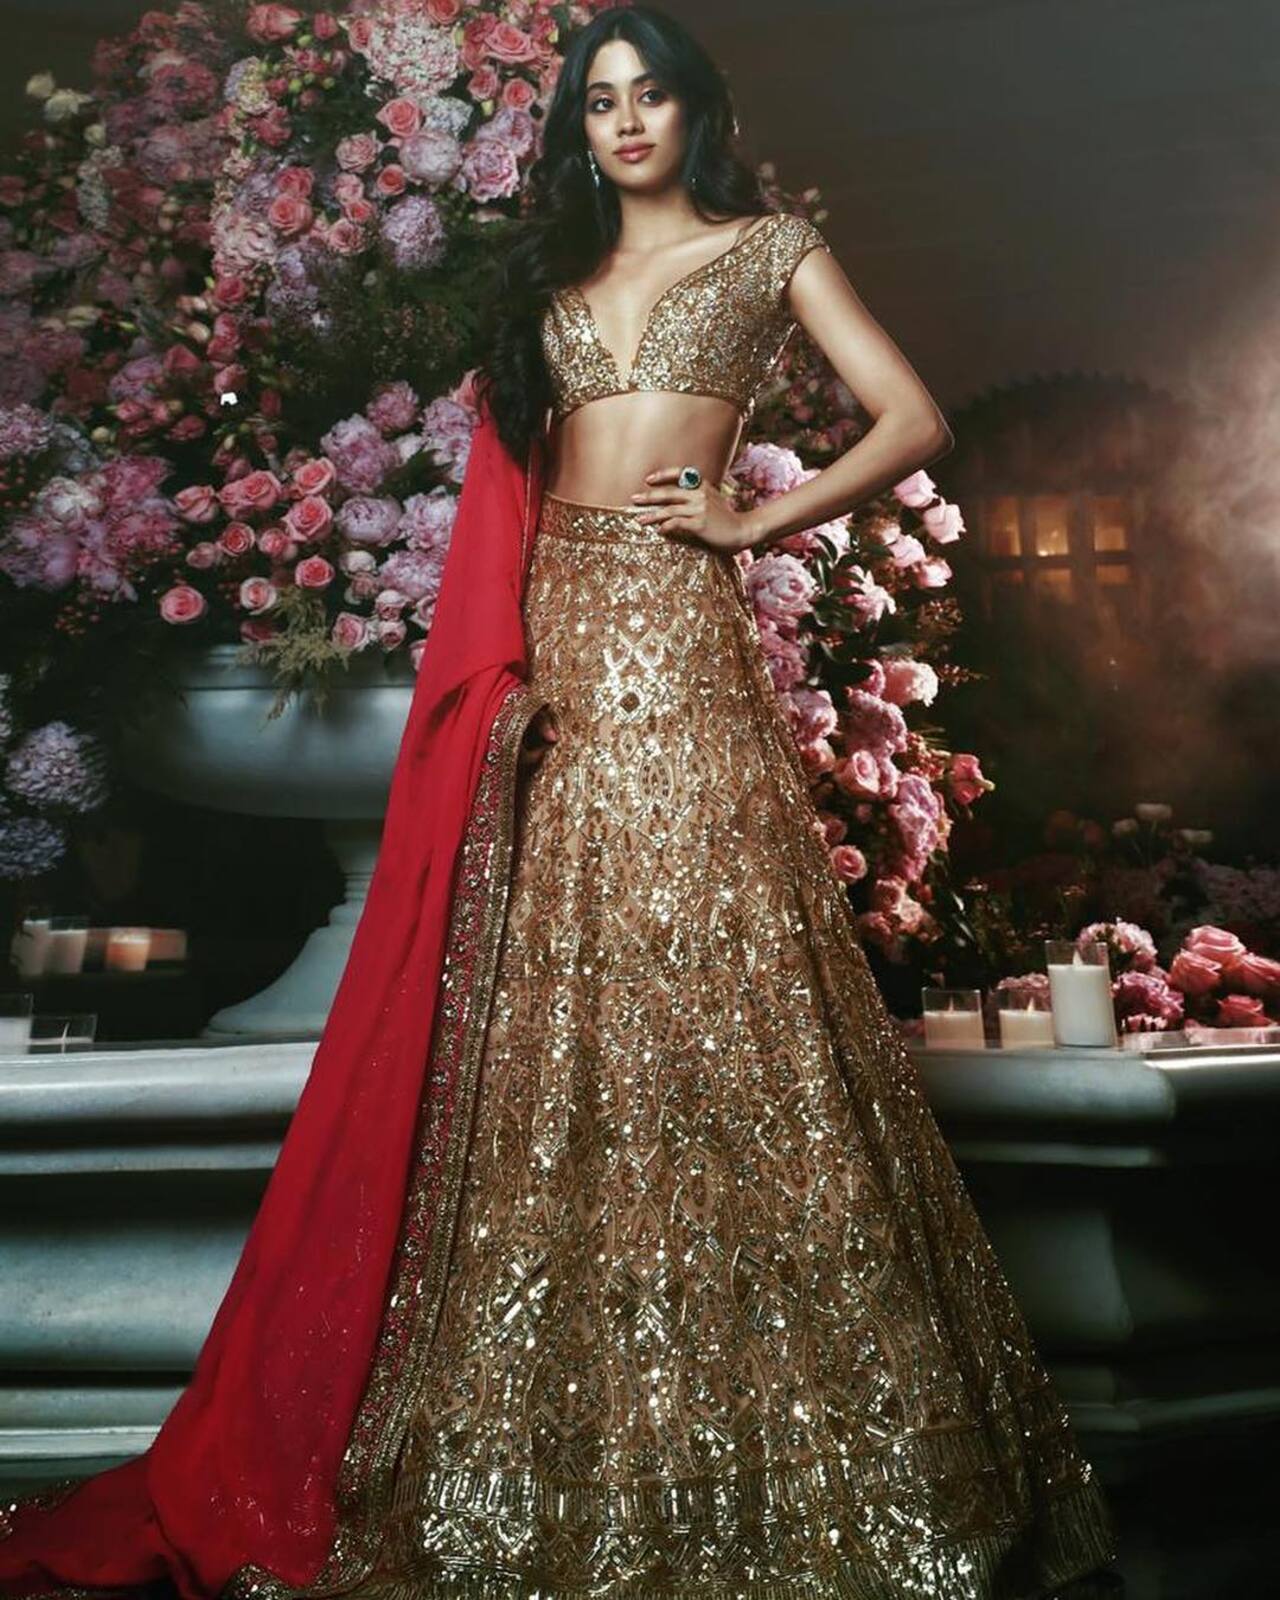 Janhvi definitely has a thing for Manish Malhotra outfits! She flaunted a gold lehenga by the fashion designer, highlighted with scarlet and detailed sequin embroidery. The A-line lehenga came with a matching blouse having a deep neckline. She paired it with a red dupatta with a gold border. Janhvi balanced the opulent outfit by wearing minimal jewelry. She chose emerald and diamond drop earrings and a matching ring